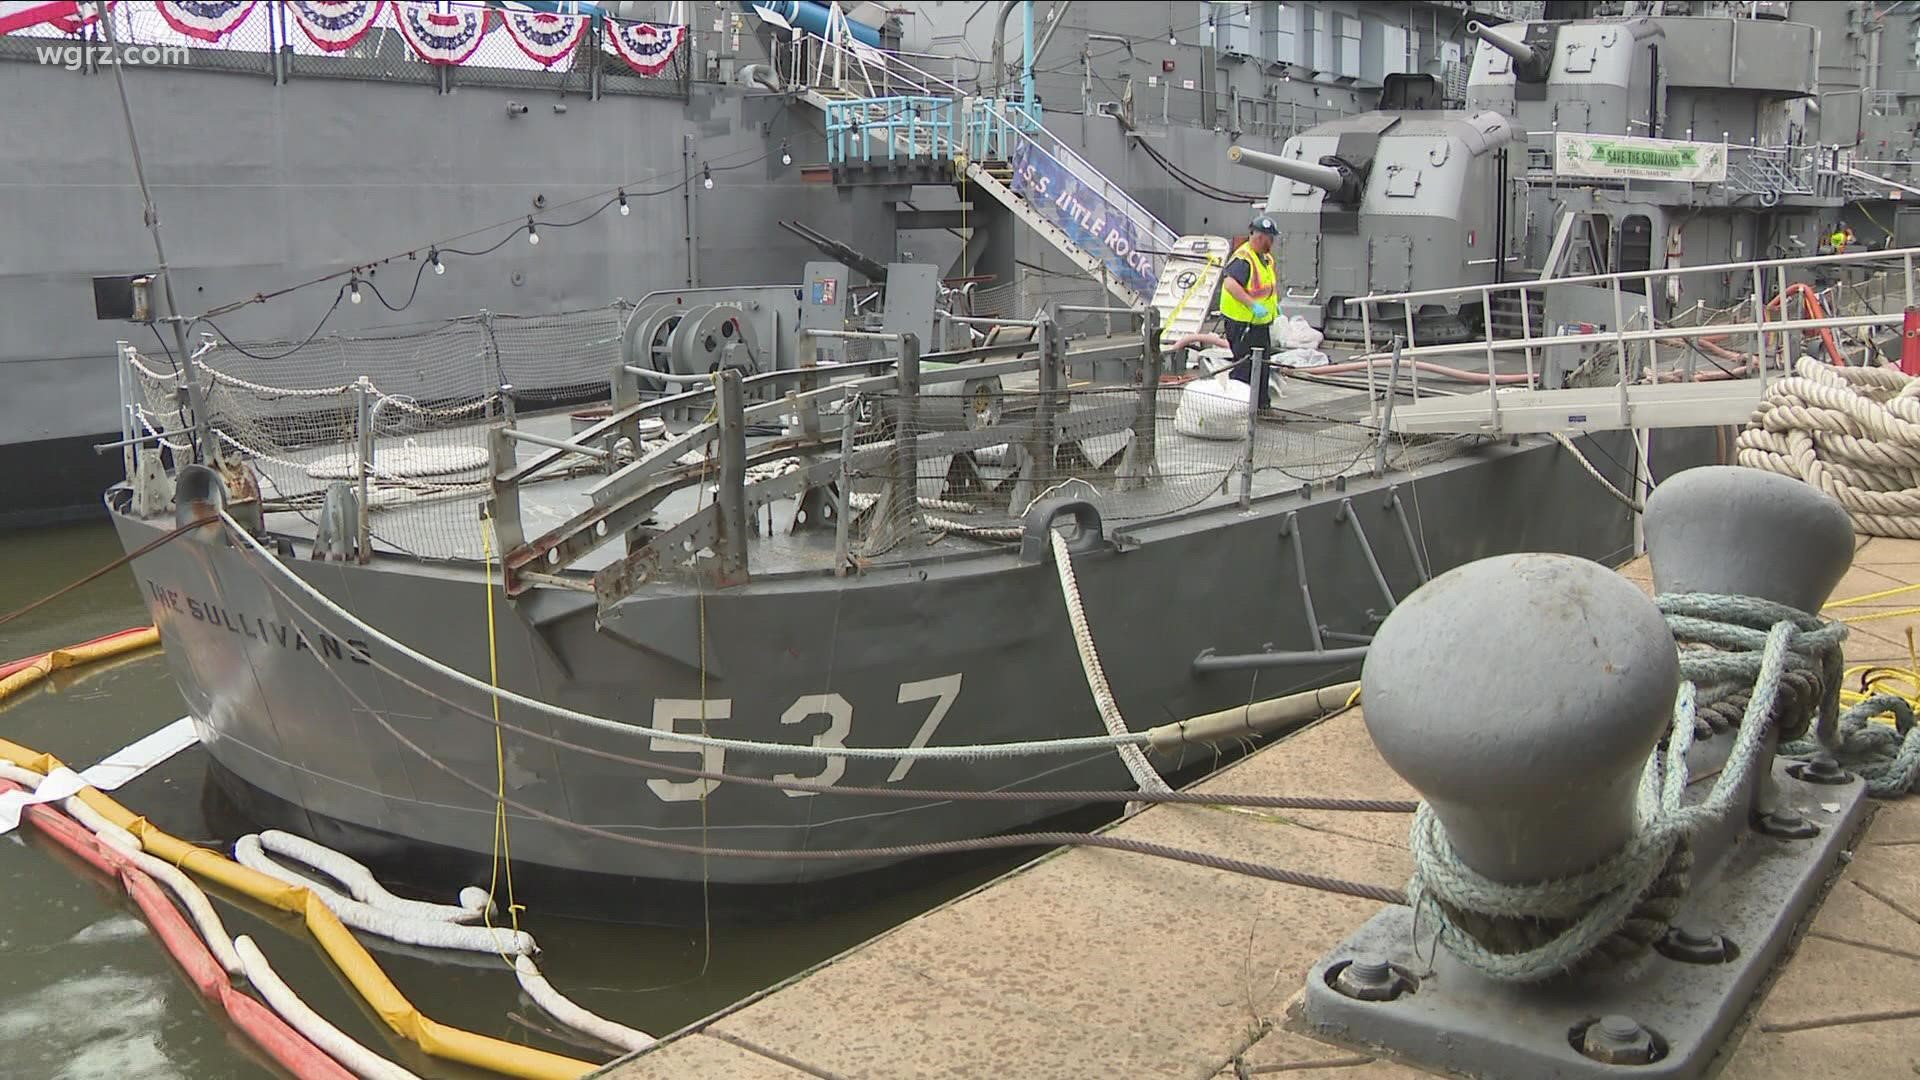 Those grants range between 50 and 750-thousand dollars... and are focused on preserving naval history.